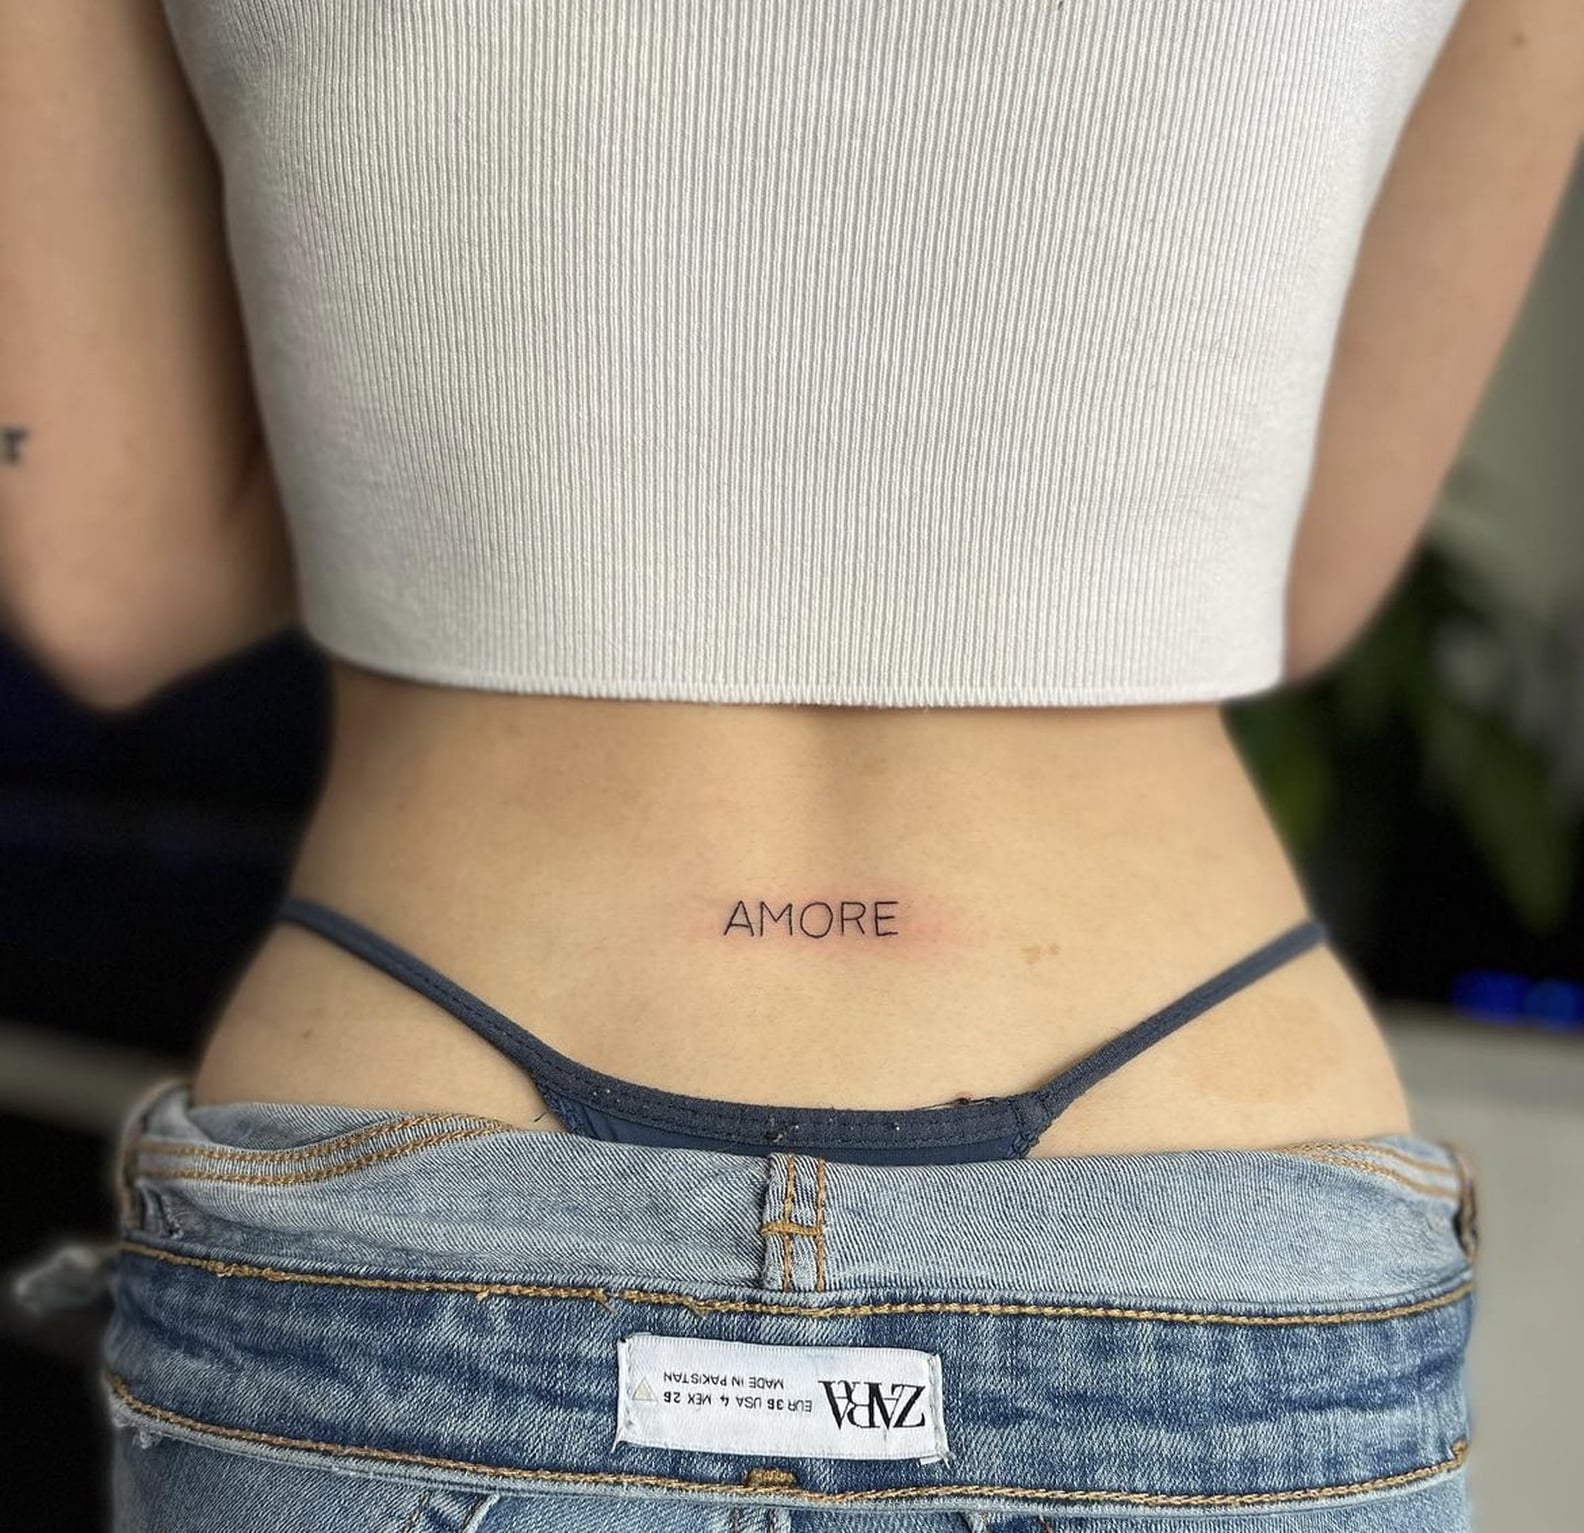 A Reclamation Of The Tramp Stamp Tattoo Popsugar Beauty